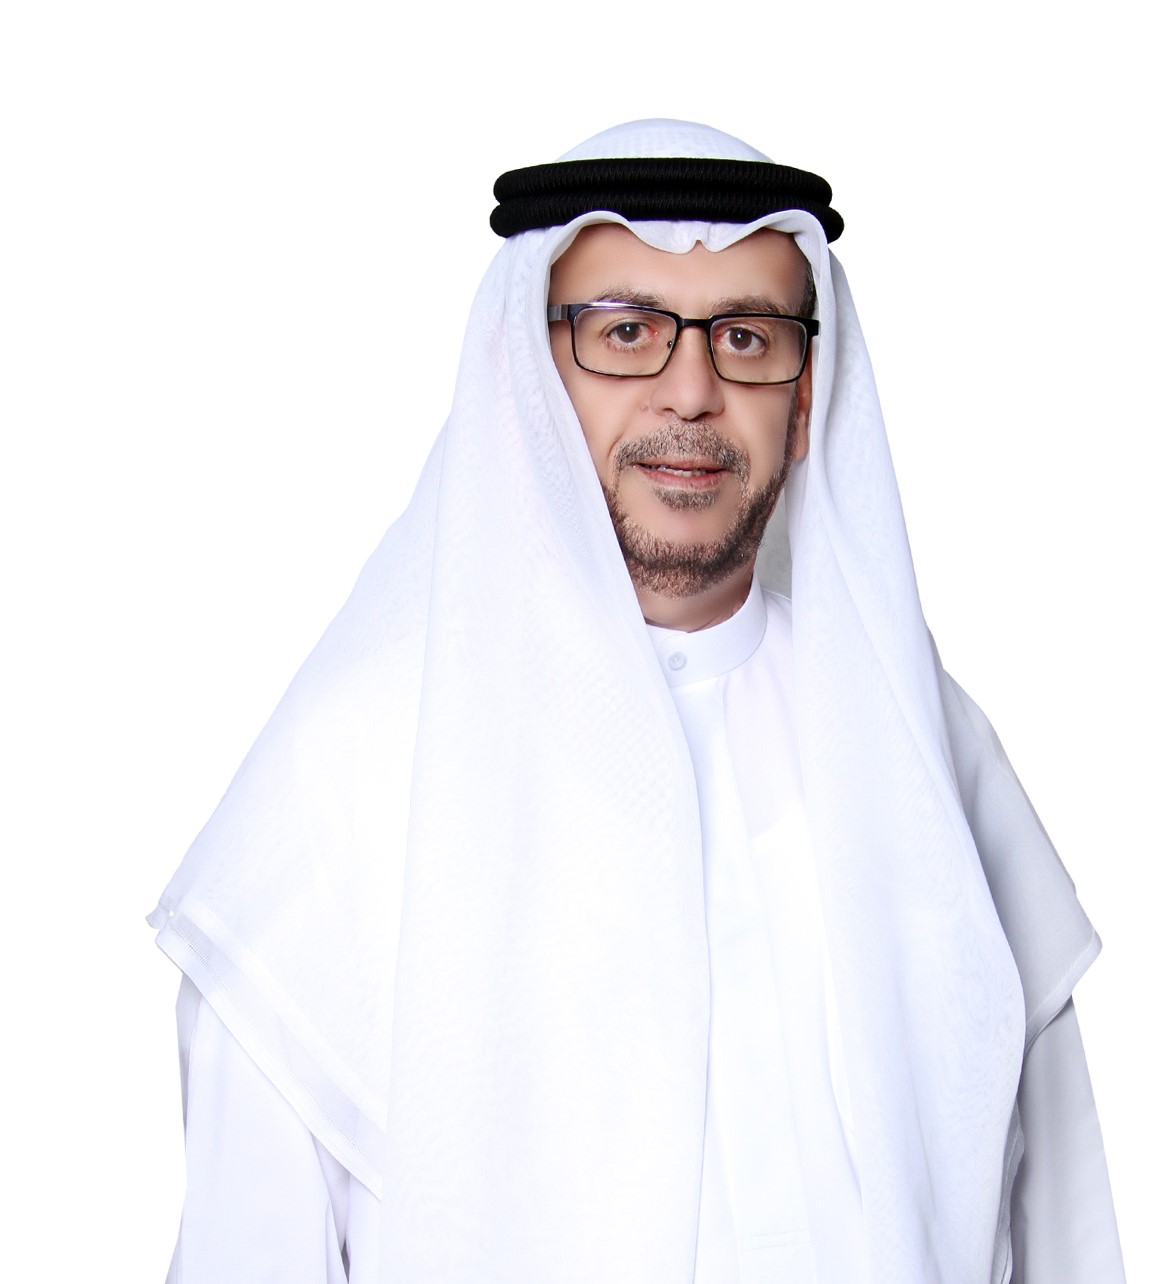 Abdullah Al Muwaiji: The Uae Economy Will Witness Exceptional Growth After Adopting The Plan Of Doubling Re-Export By 2030